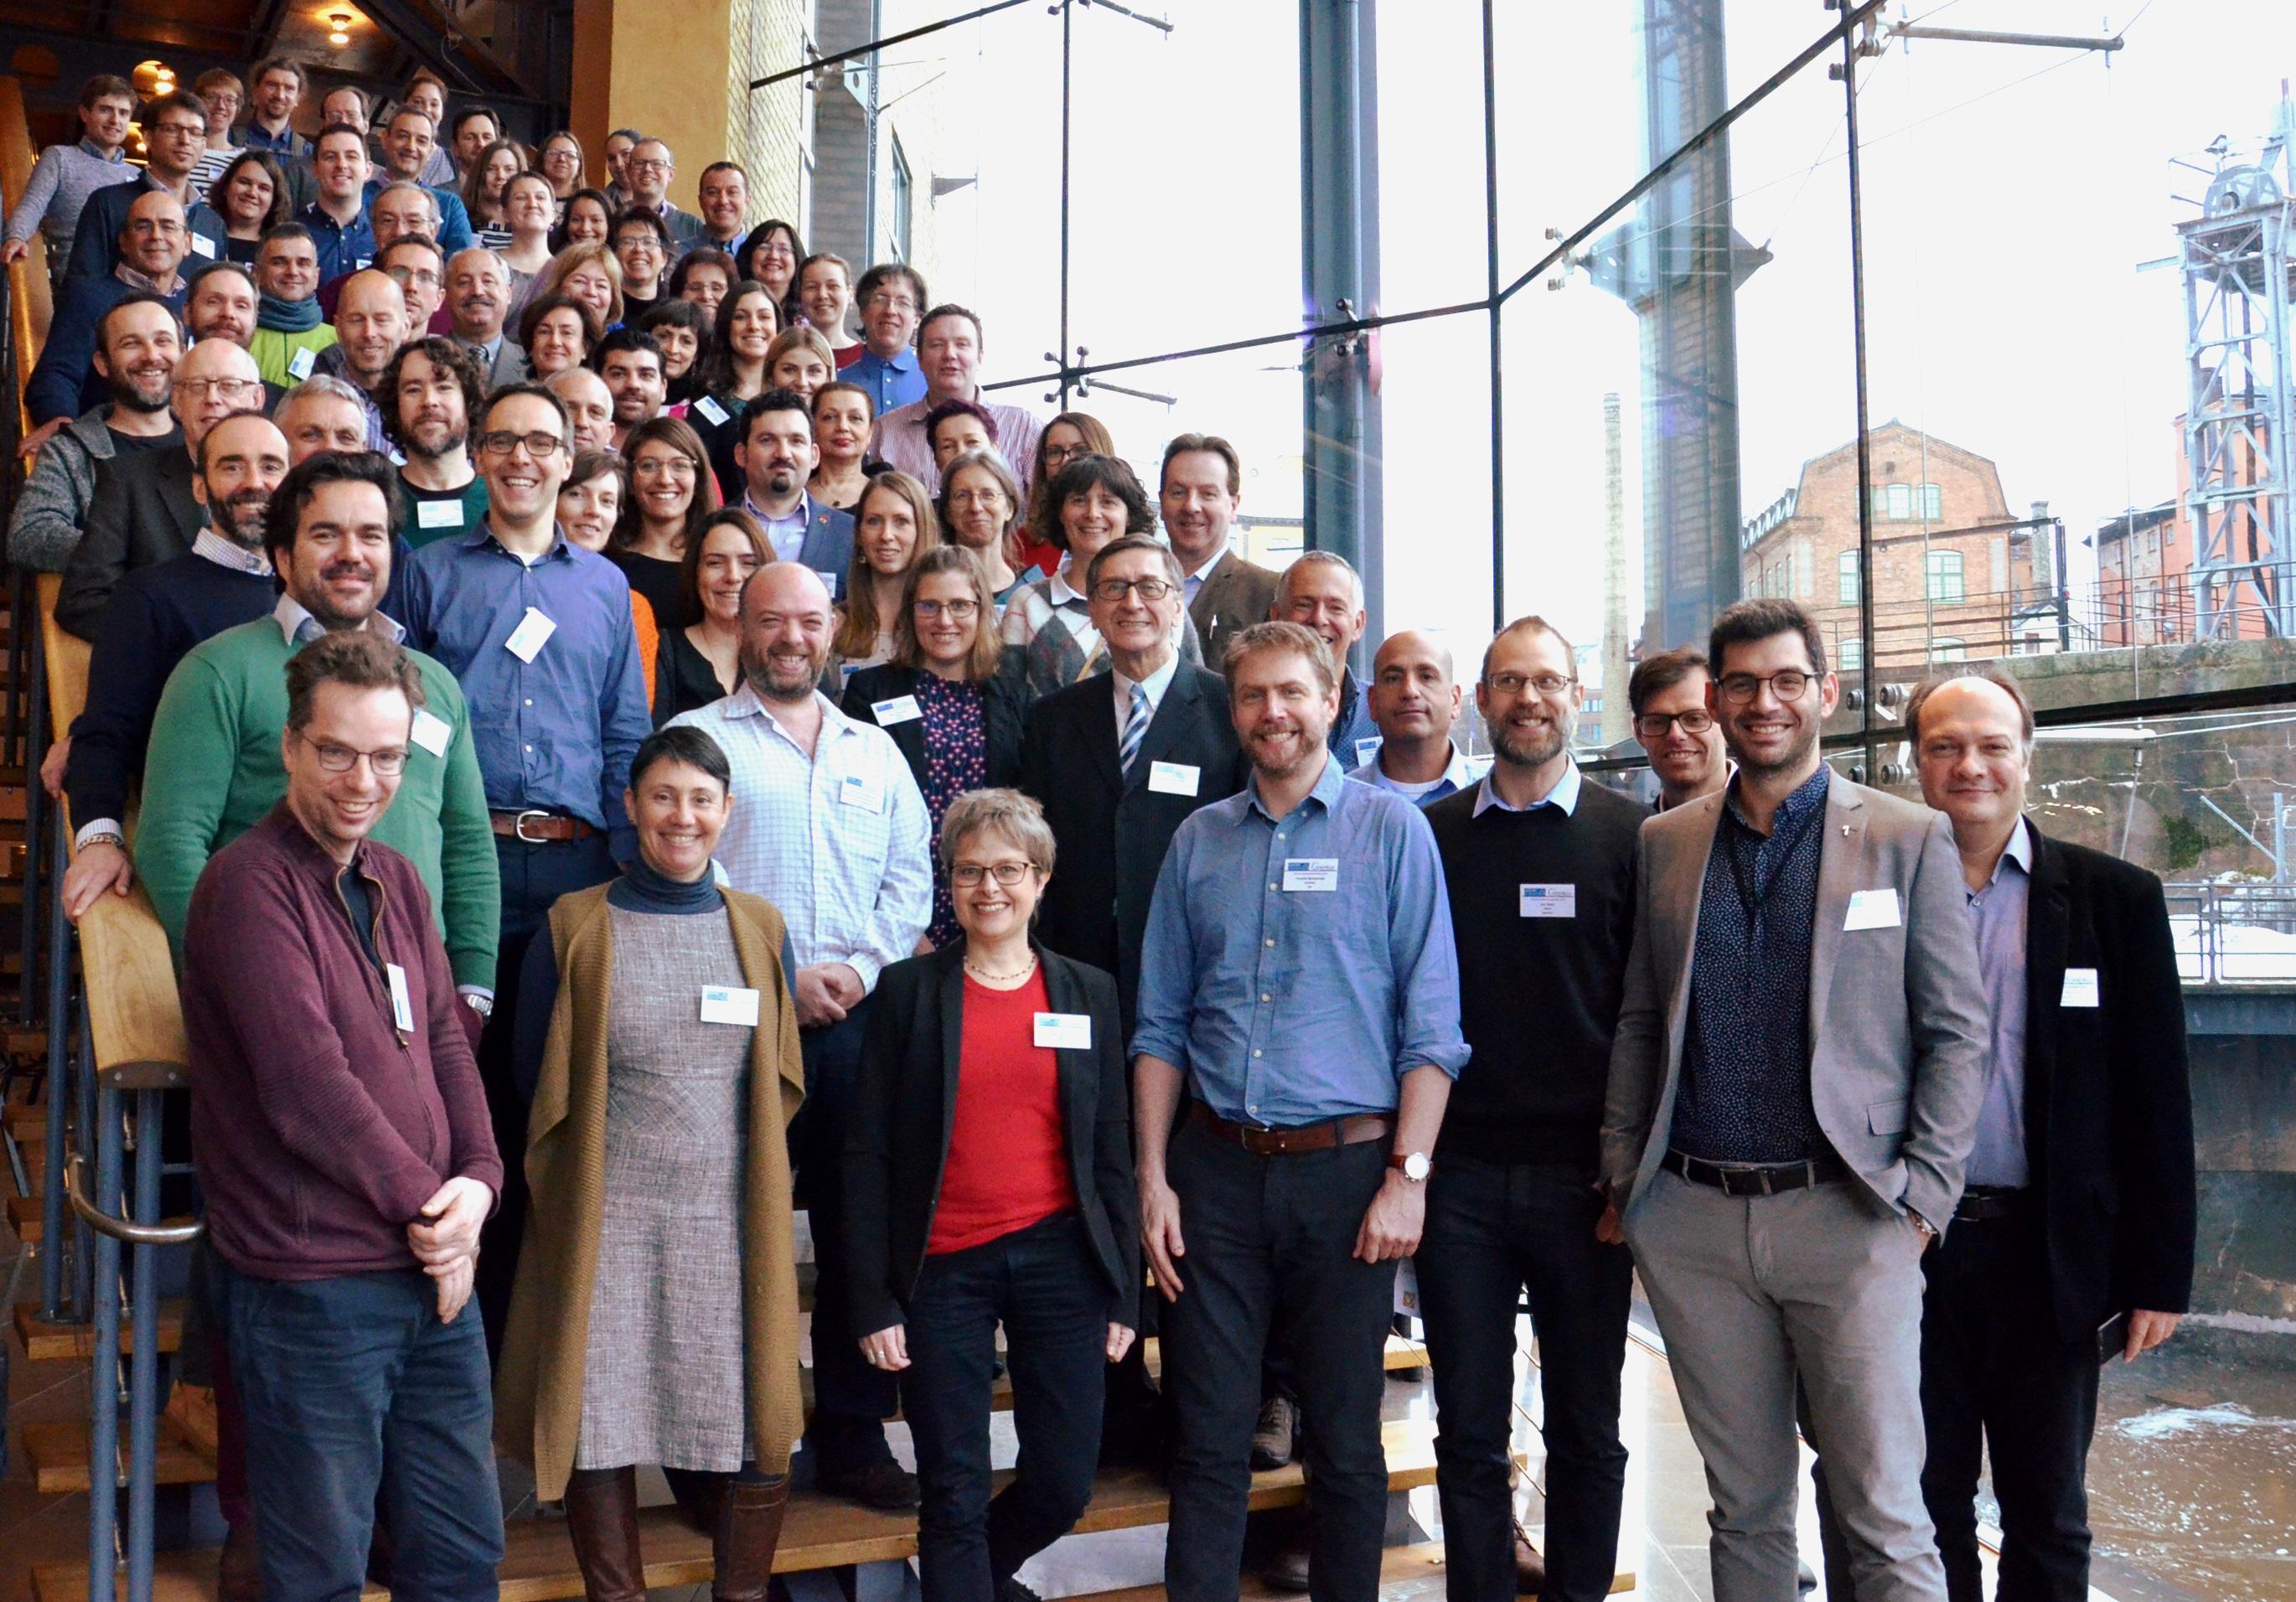 Participants at the 13th annual EFAS meeting in Norrköping, Sweden, 13-14 March 2018.